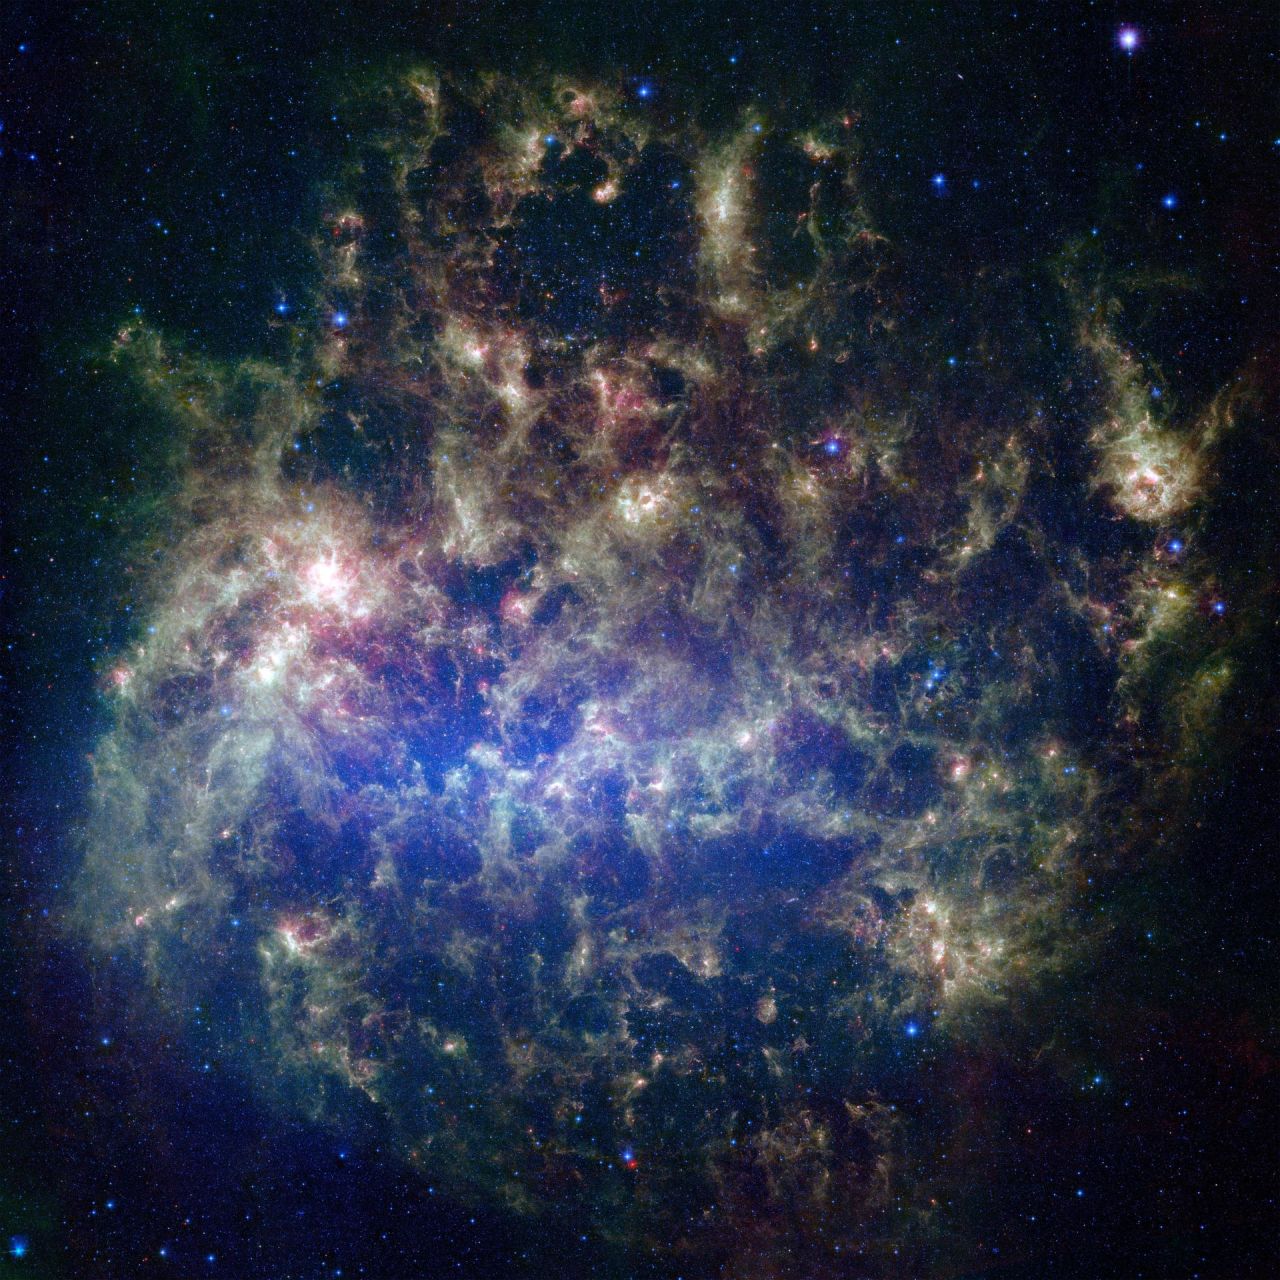 This vibrant image from NASA's Spitzer Space Telescope shows the Large Magellanic Cloud, a satellite galaxy to our own Milky Way galaxy.